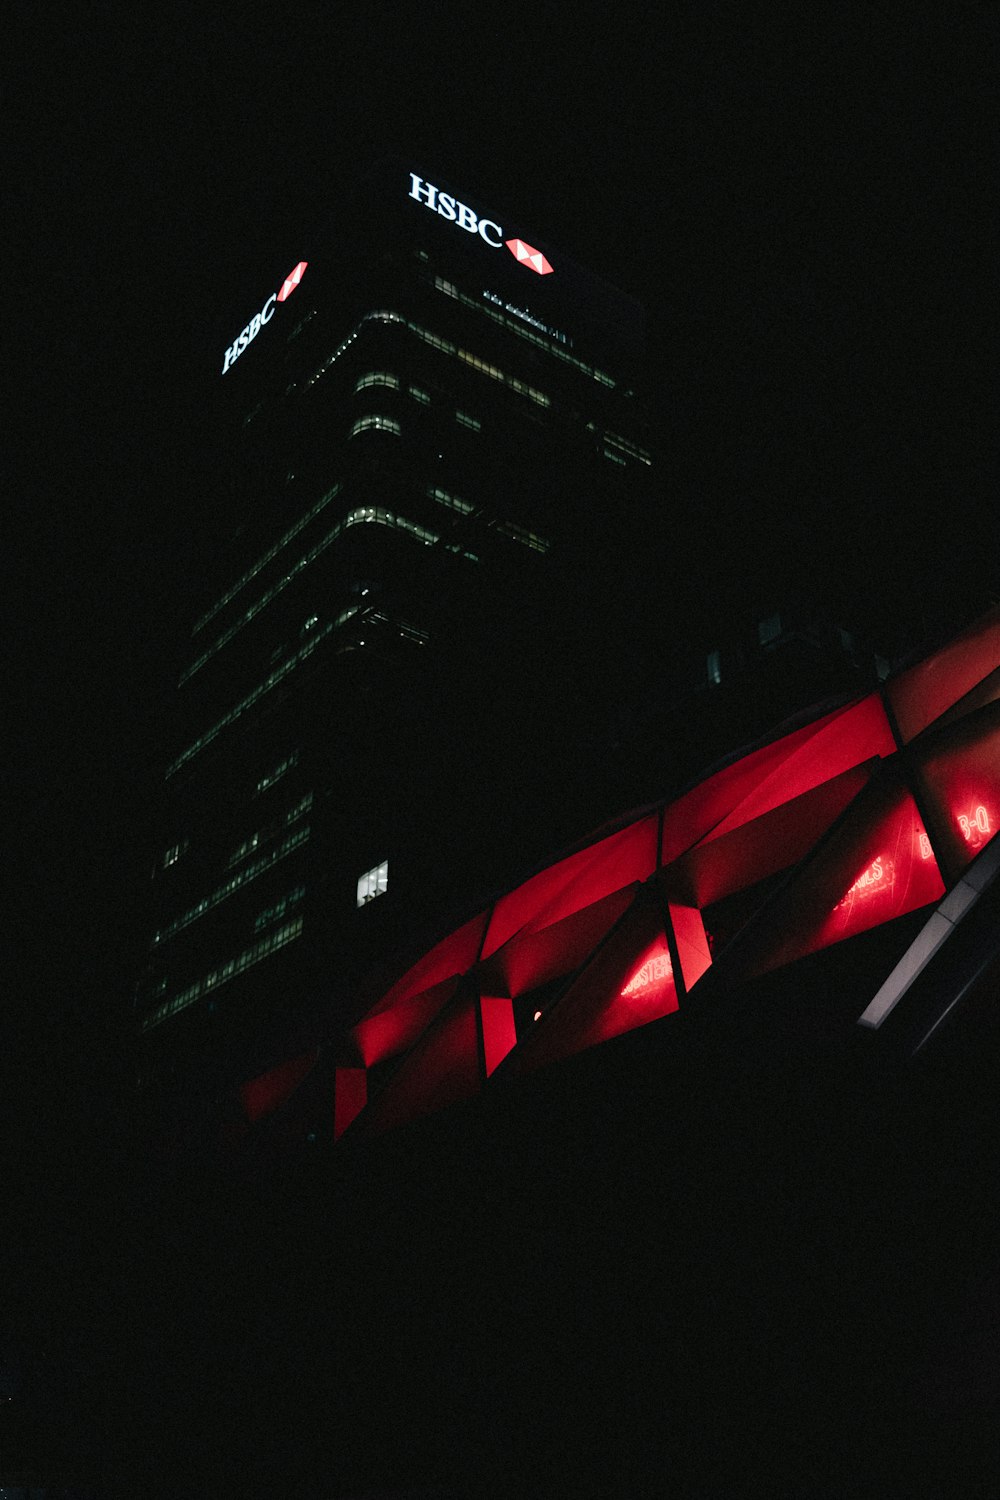 a tall building lit up in the dark